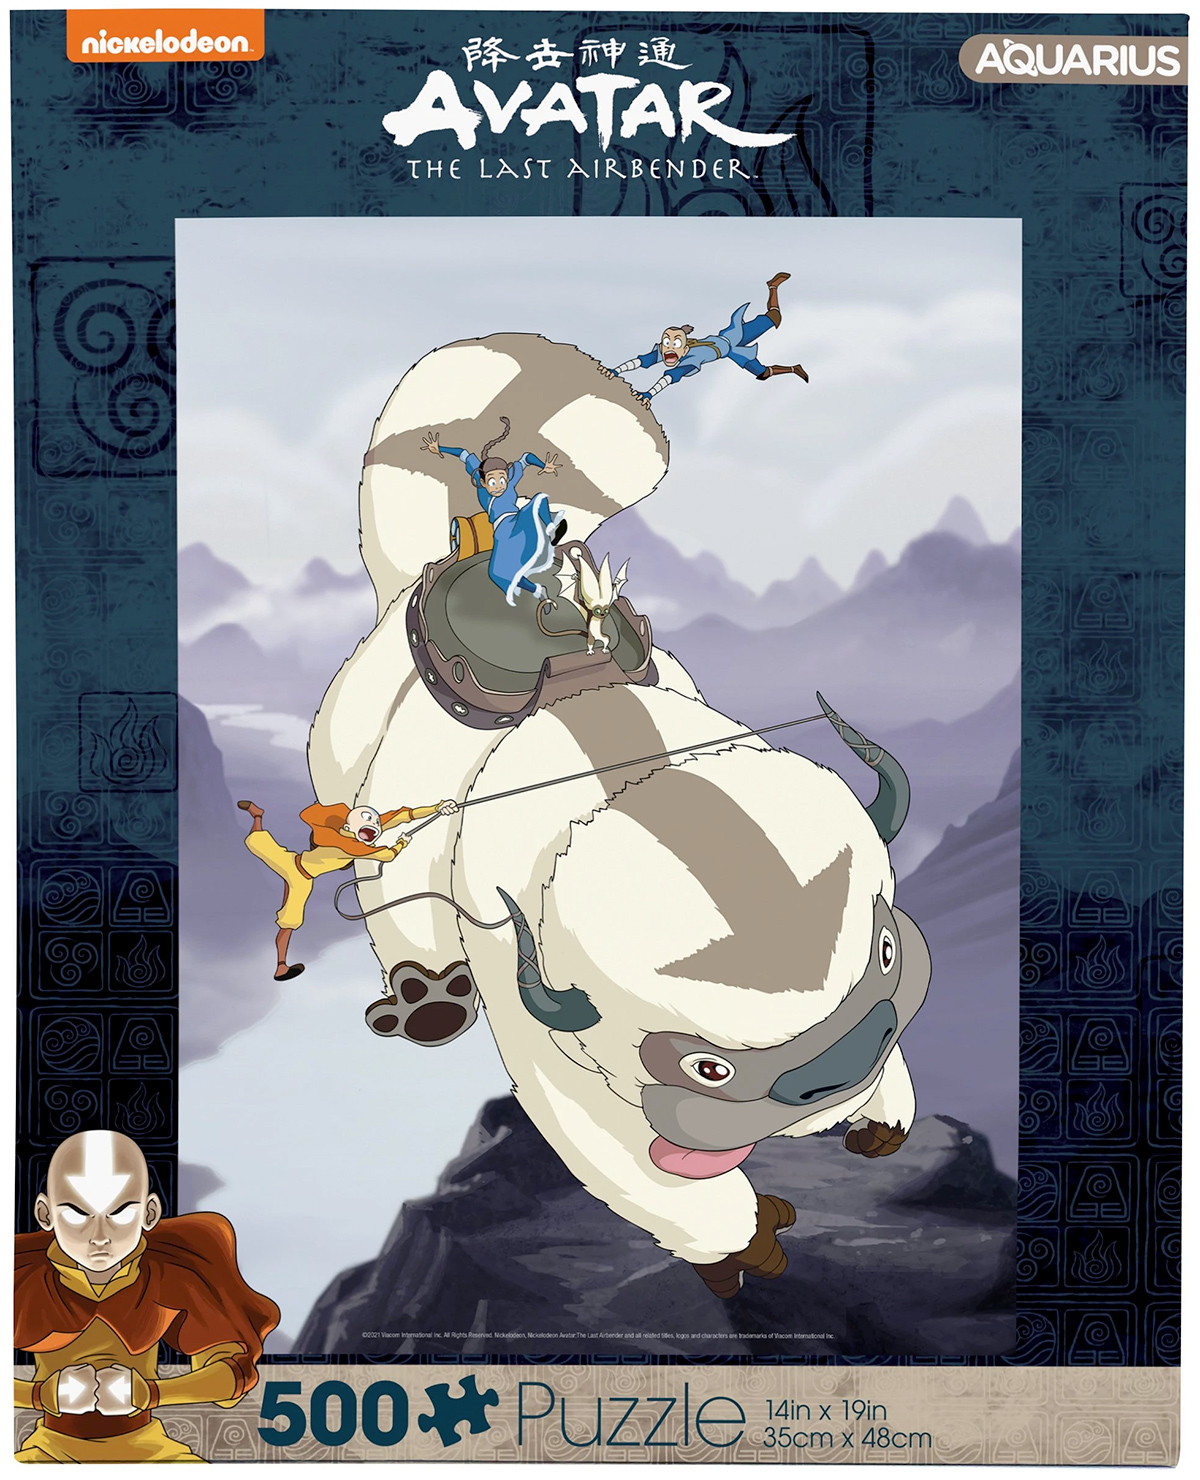 Avatar Appa and Gang 500 Piece Jigsaw Puzzle